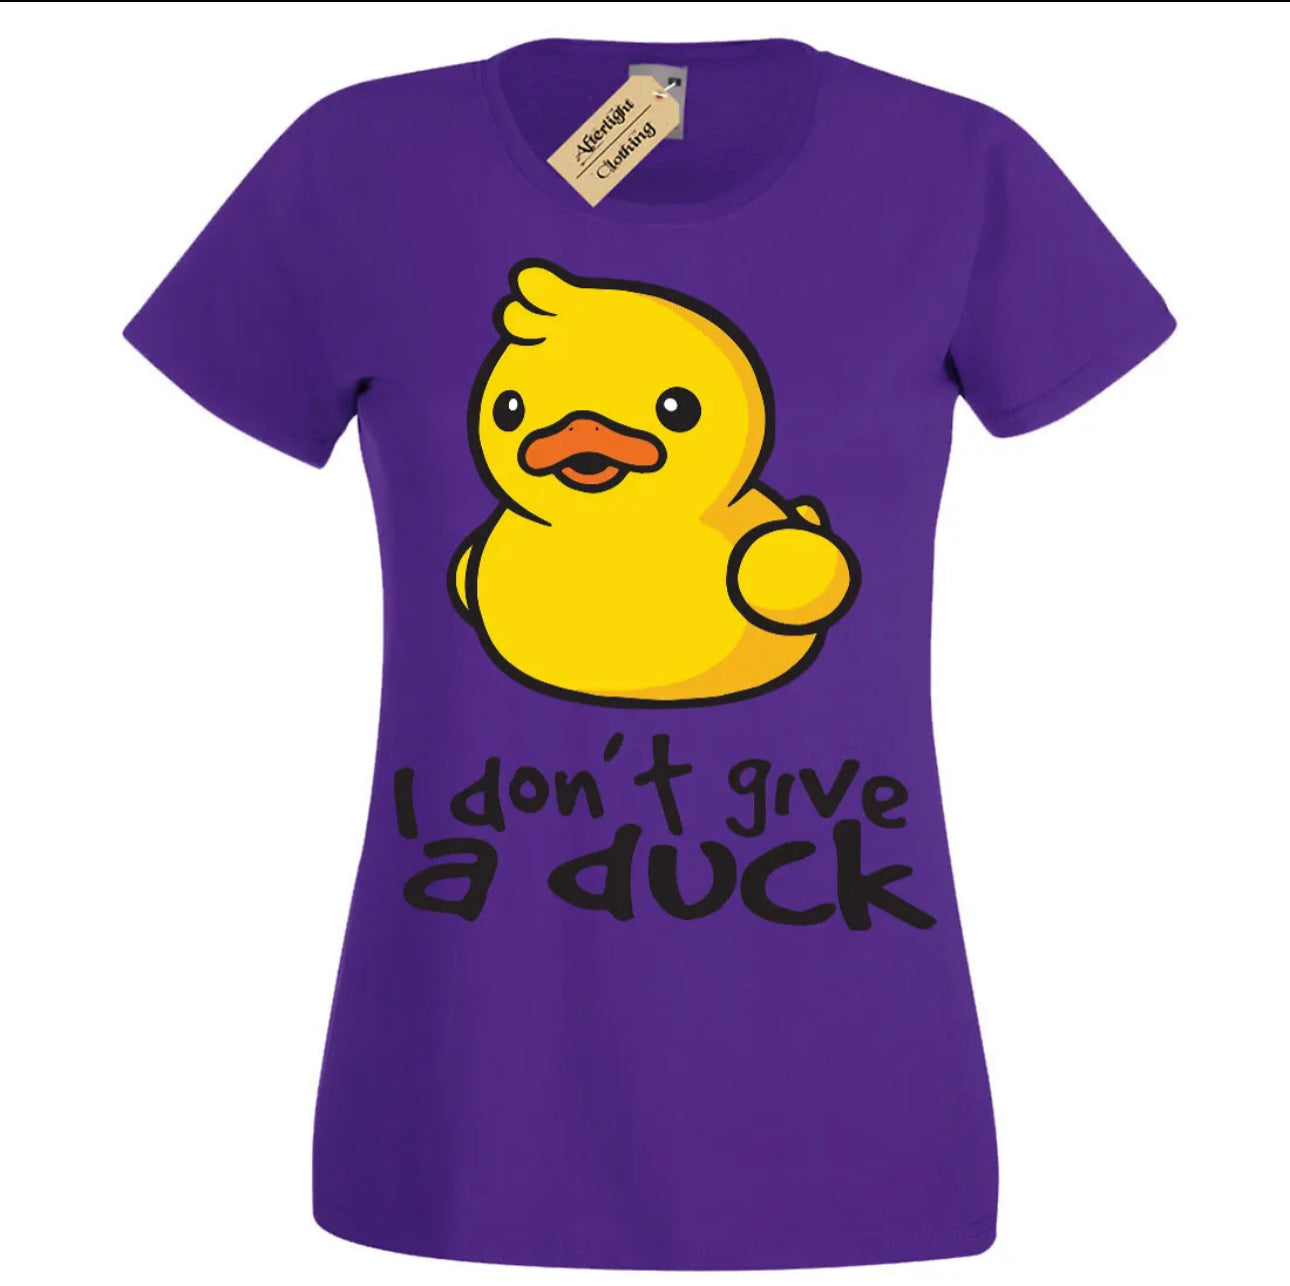 I don’t give a duck - women’s funny T-shirt